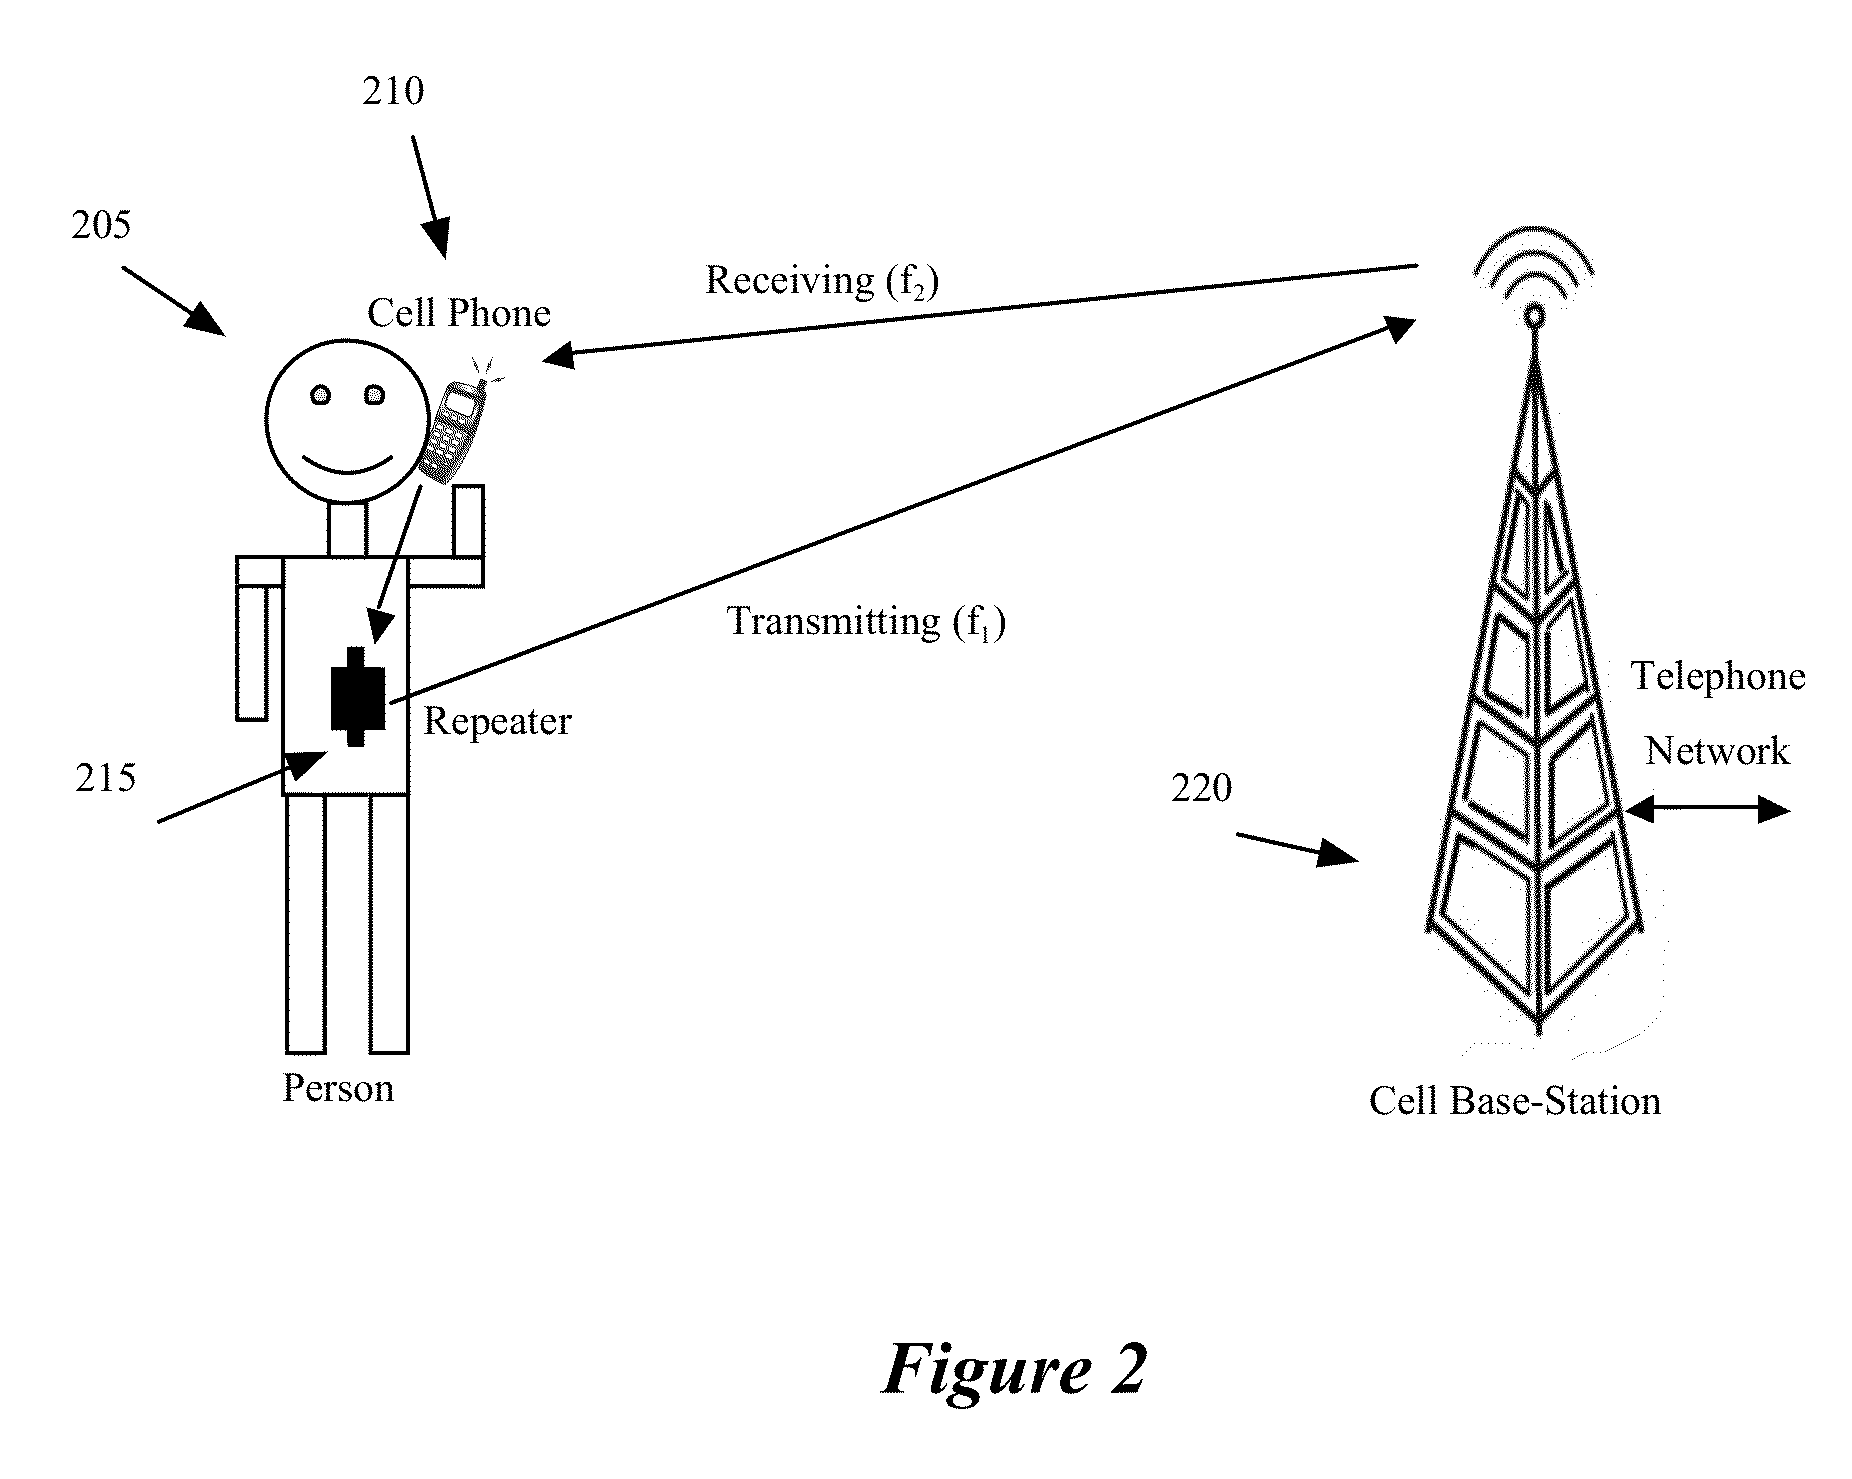 Repeater device for reducing the electromagnetic radiation transmitted from cellular phone antennas and extending phone battery life